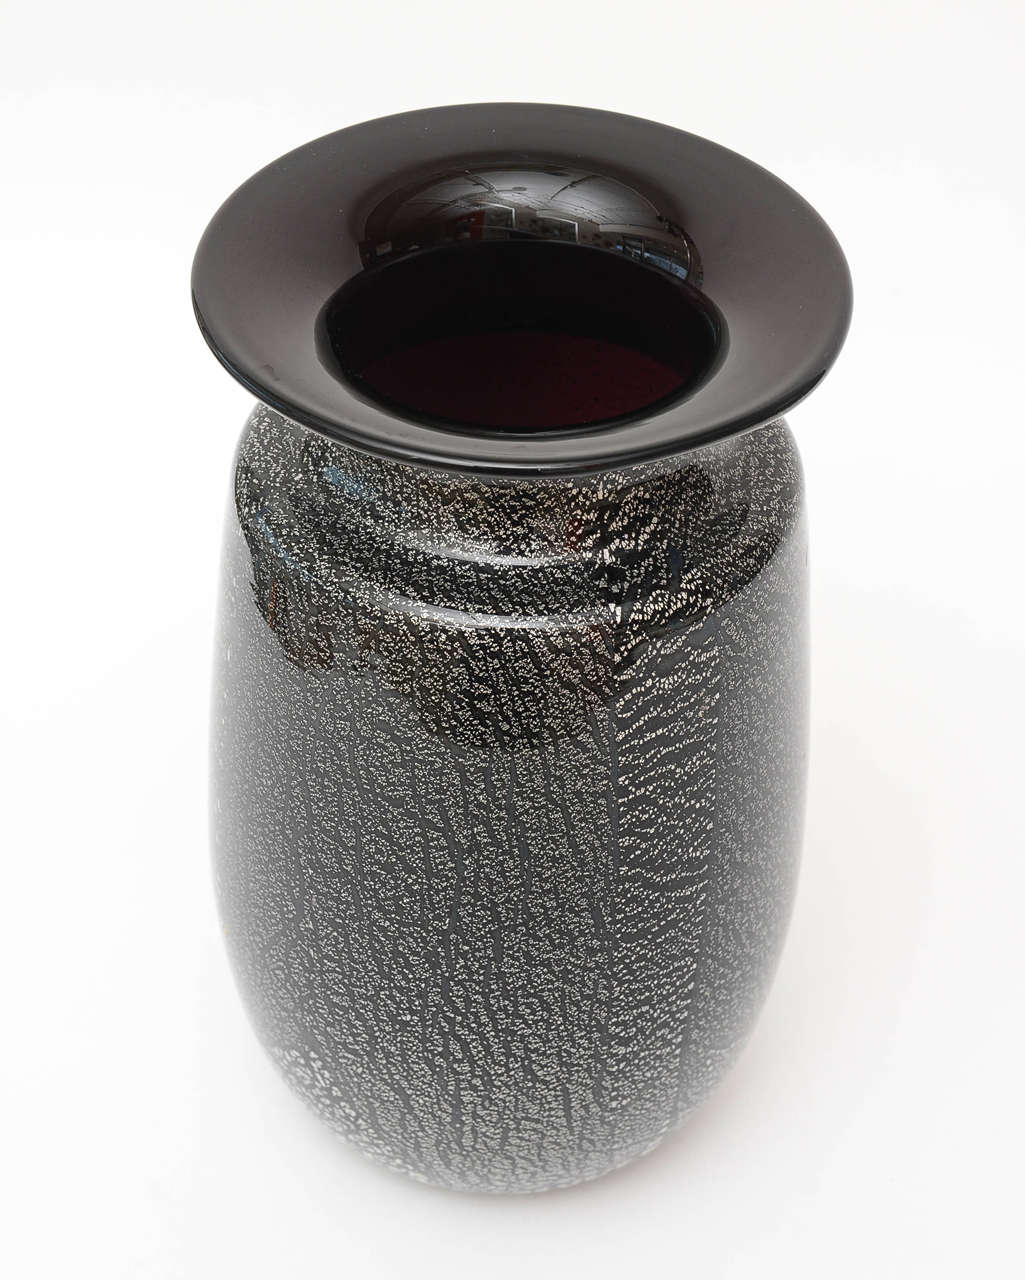 This stunning and substantial Murano vase by Seguso makes a statement all by itself without even any flowers in it!! The black glass is really amethyst glass with a purple hint inside.
The italian Maestro put abundance of random silver aventurine